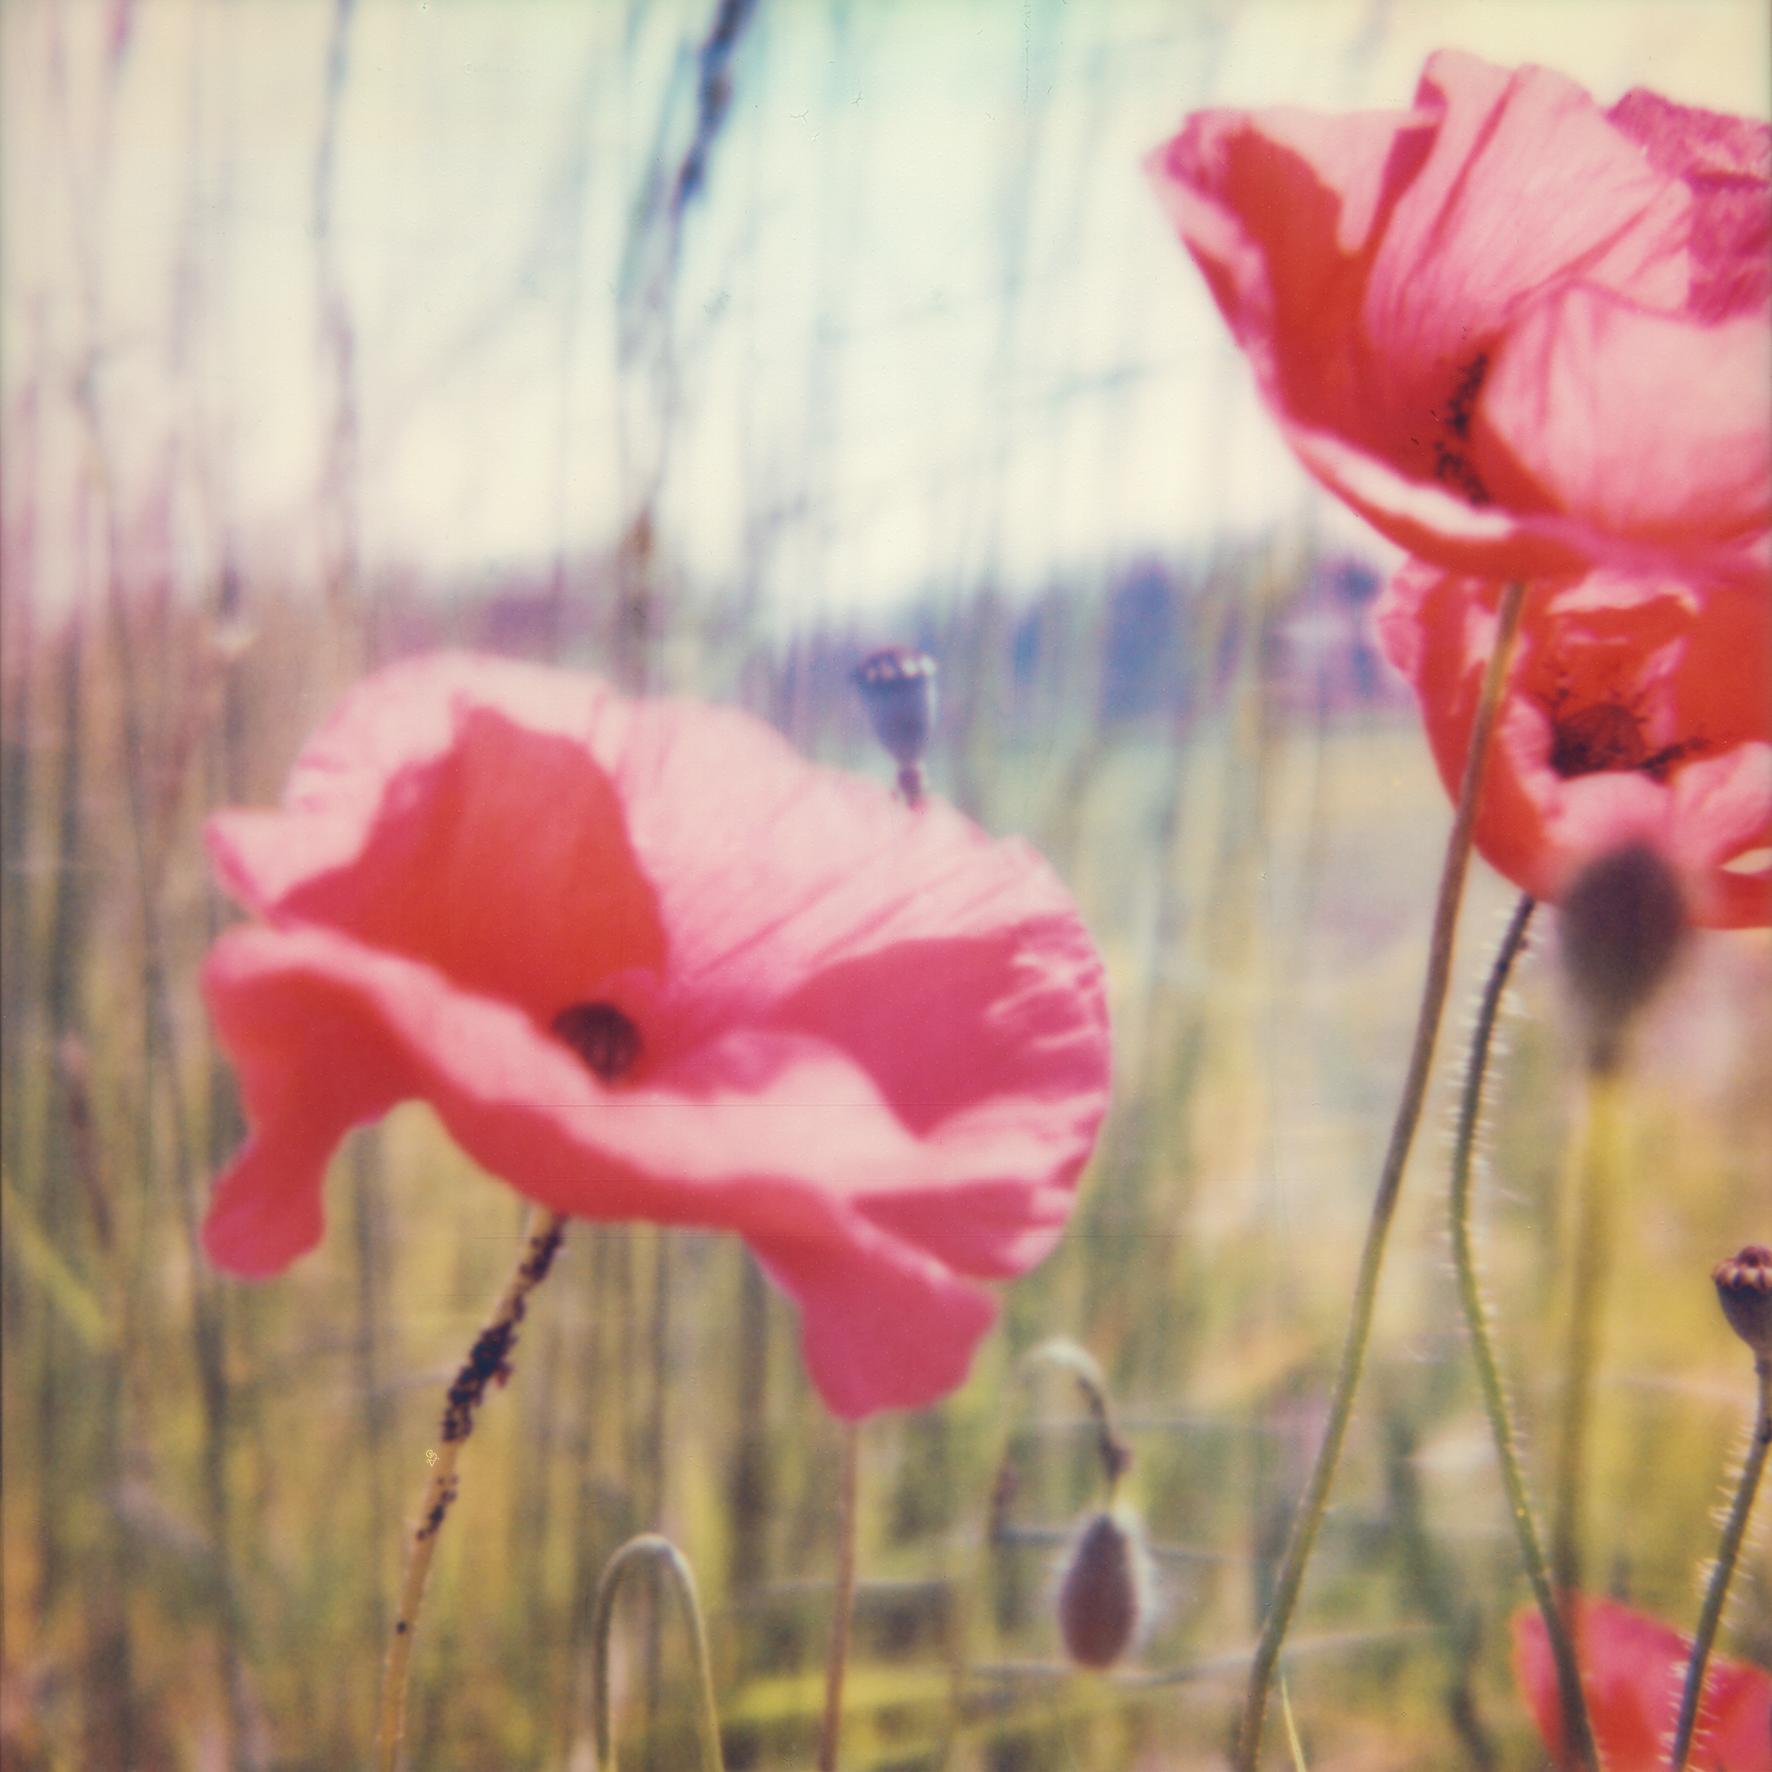 Carmen de Vos Landscape Photograph - Poppy Realm #01 [From the series Wild Things]